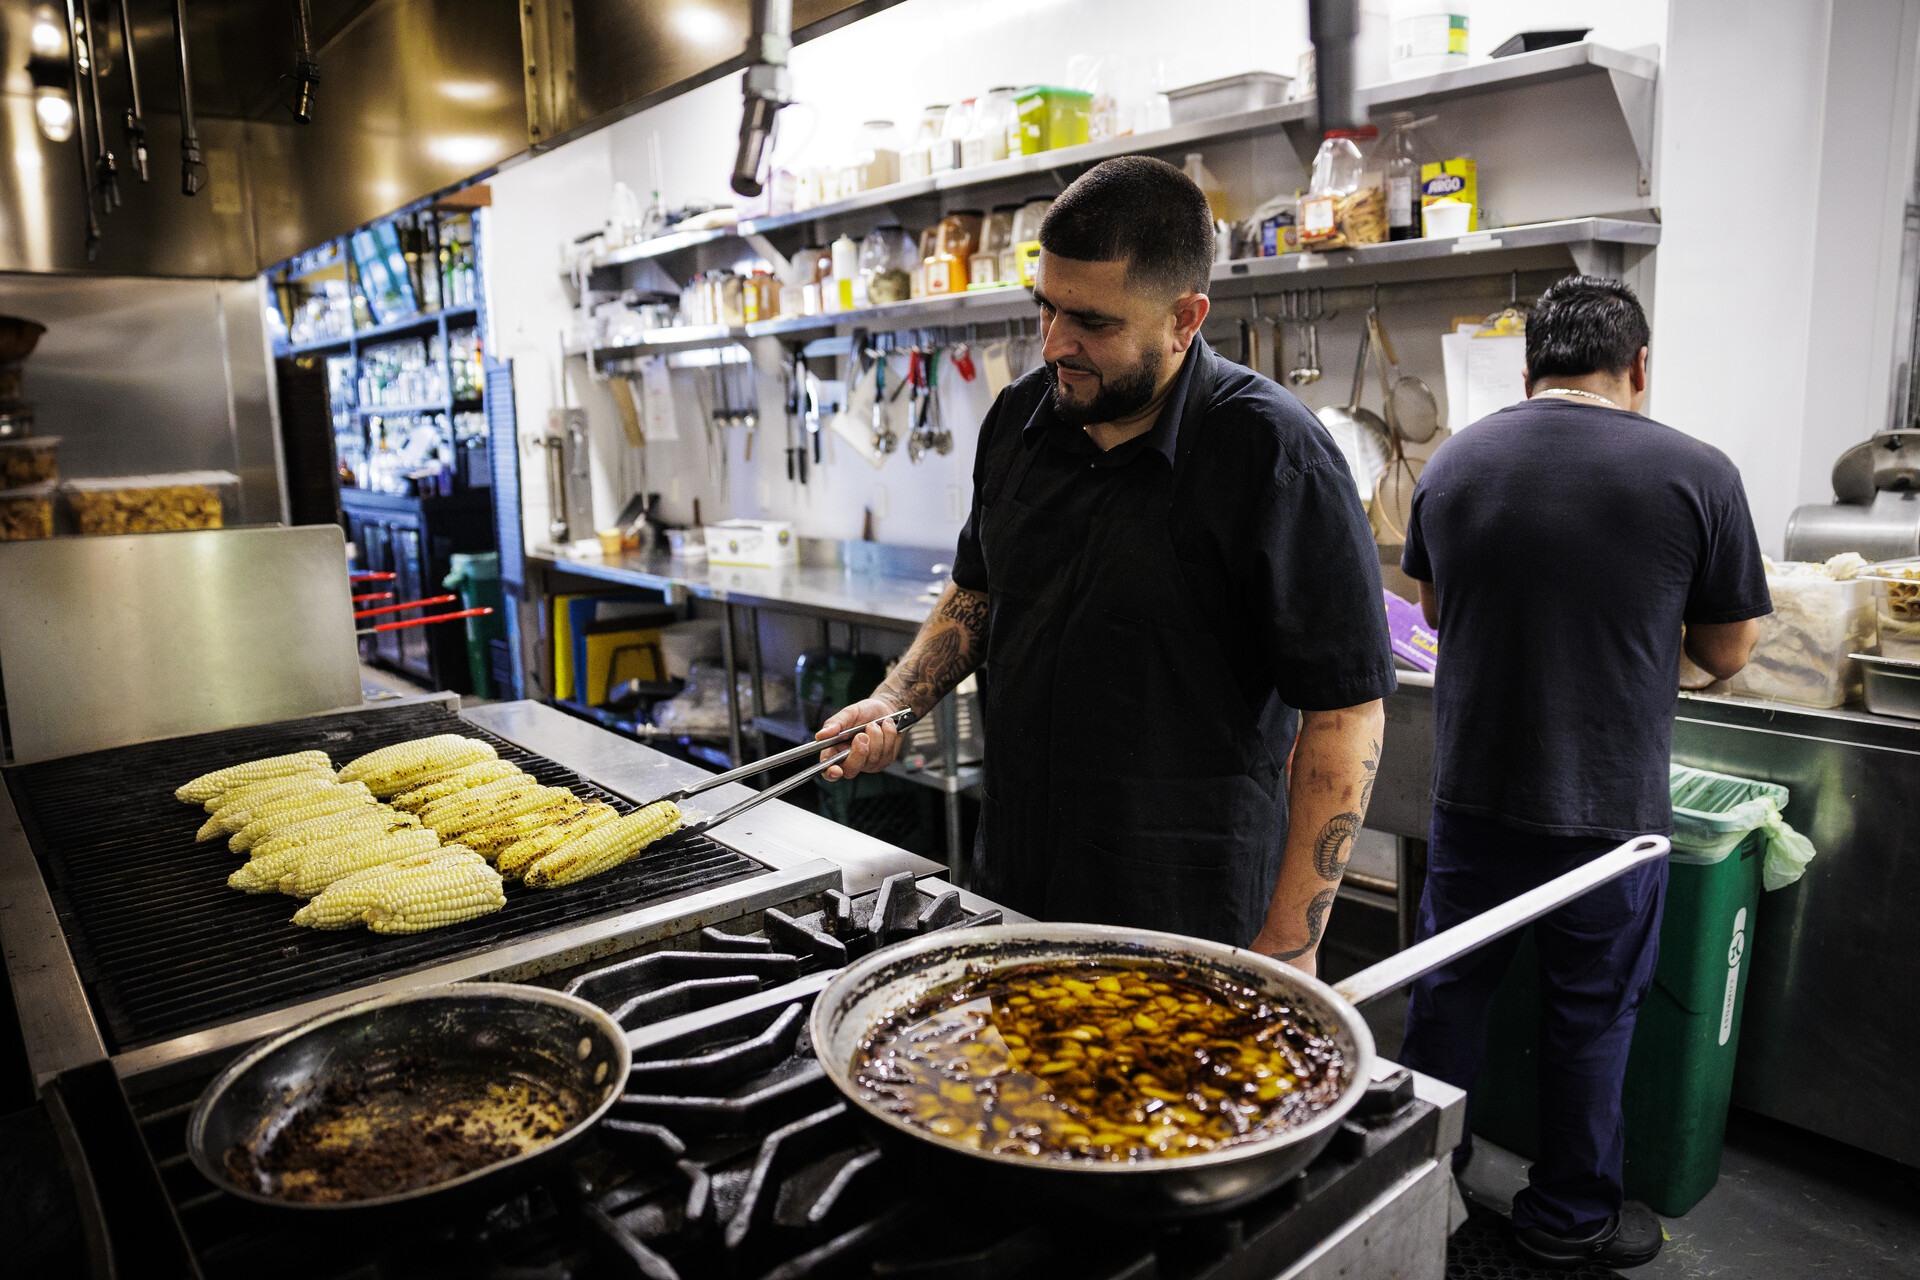 A chef uses tongs to turn ears of corn cooking on the grill inside a restaurant kitchen.